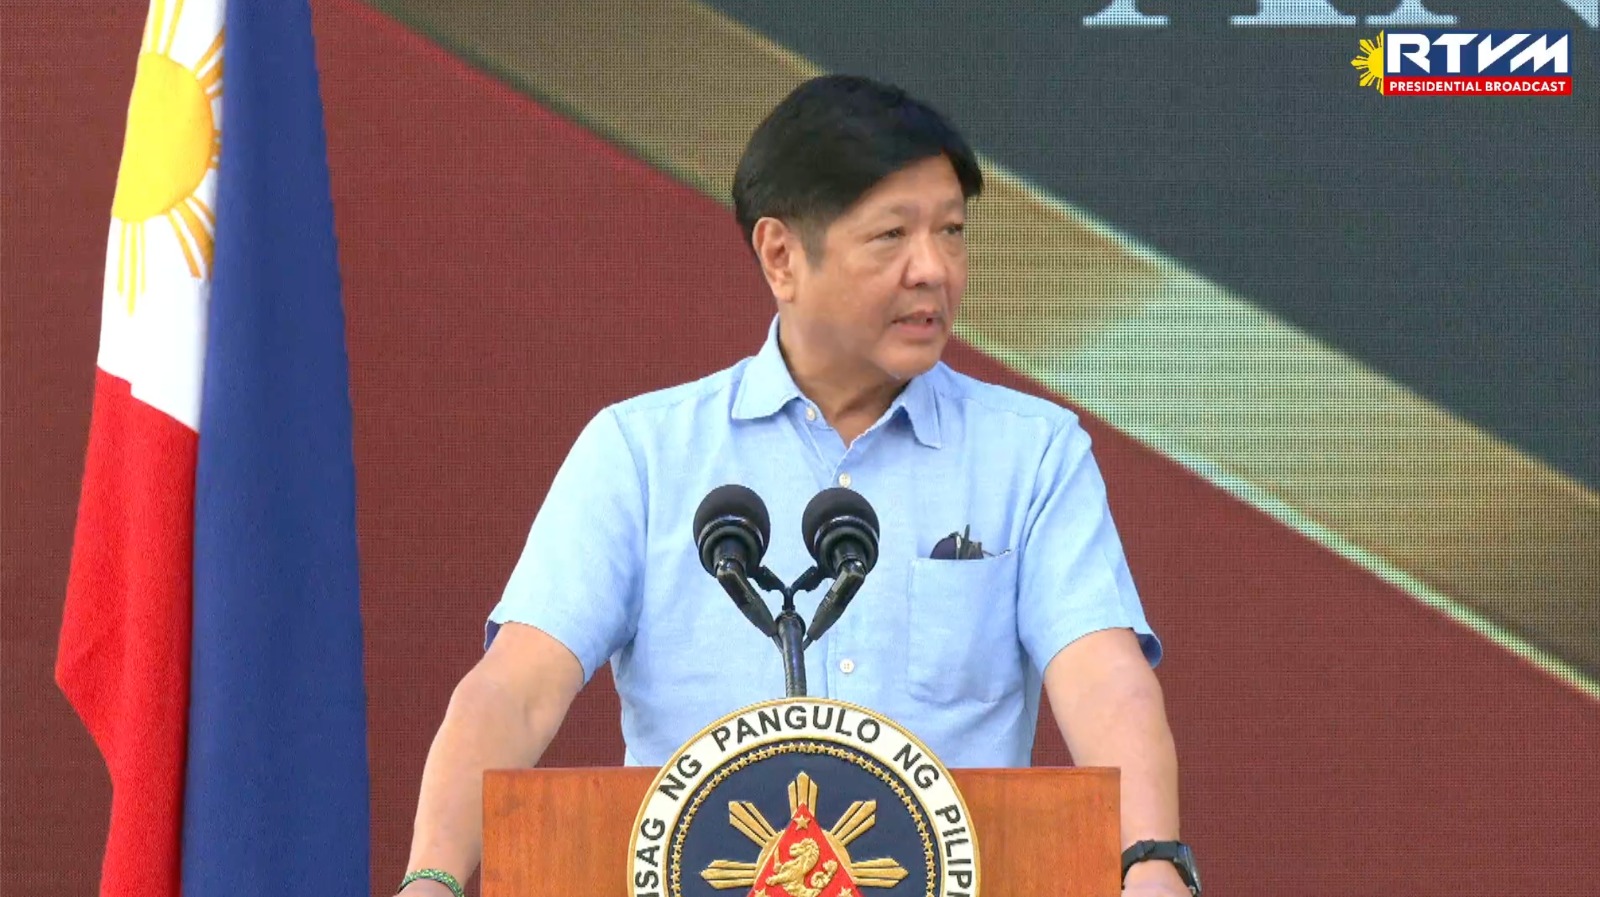 ‘Nothing serious’: Bongbong Marcos' plane had ‘minor technical issues’ causing delay